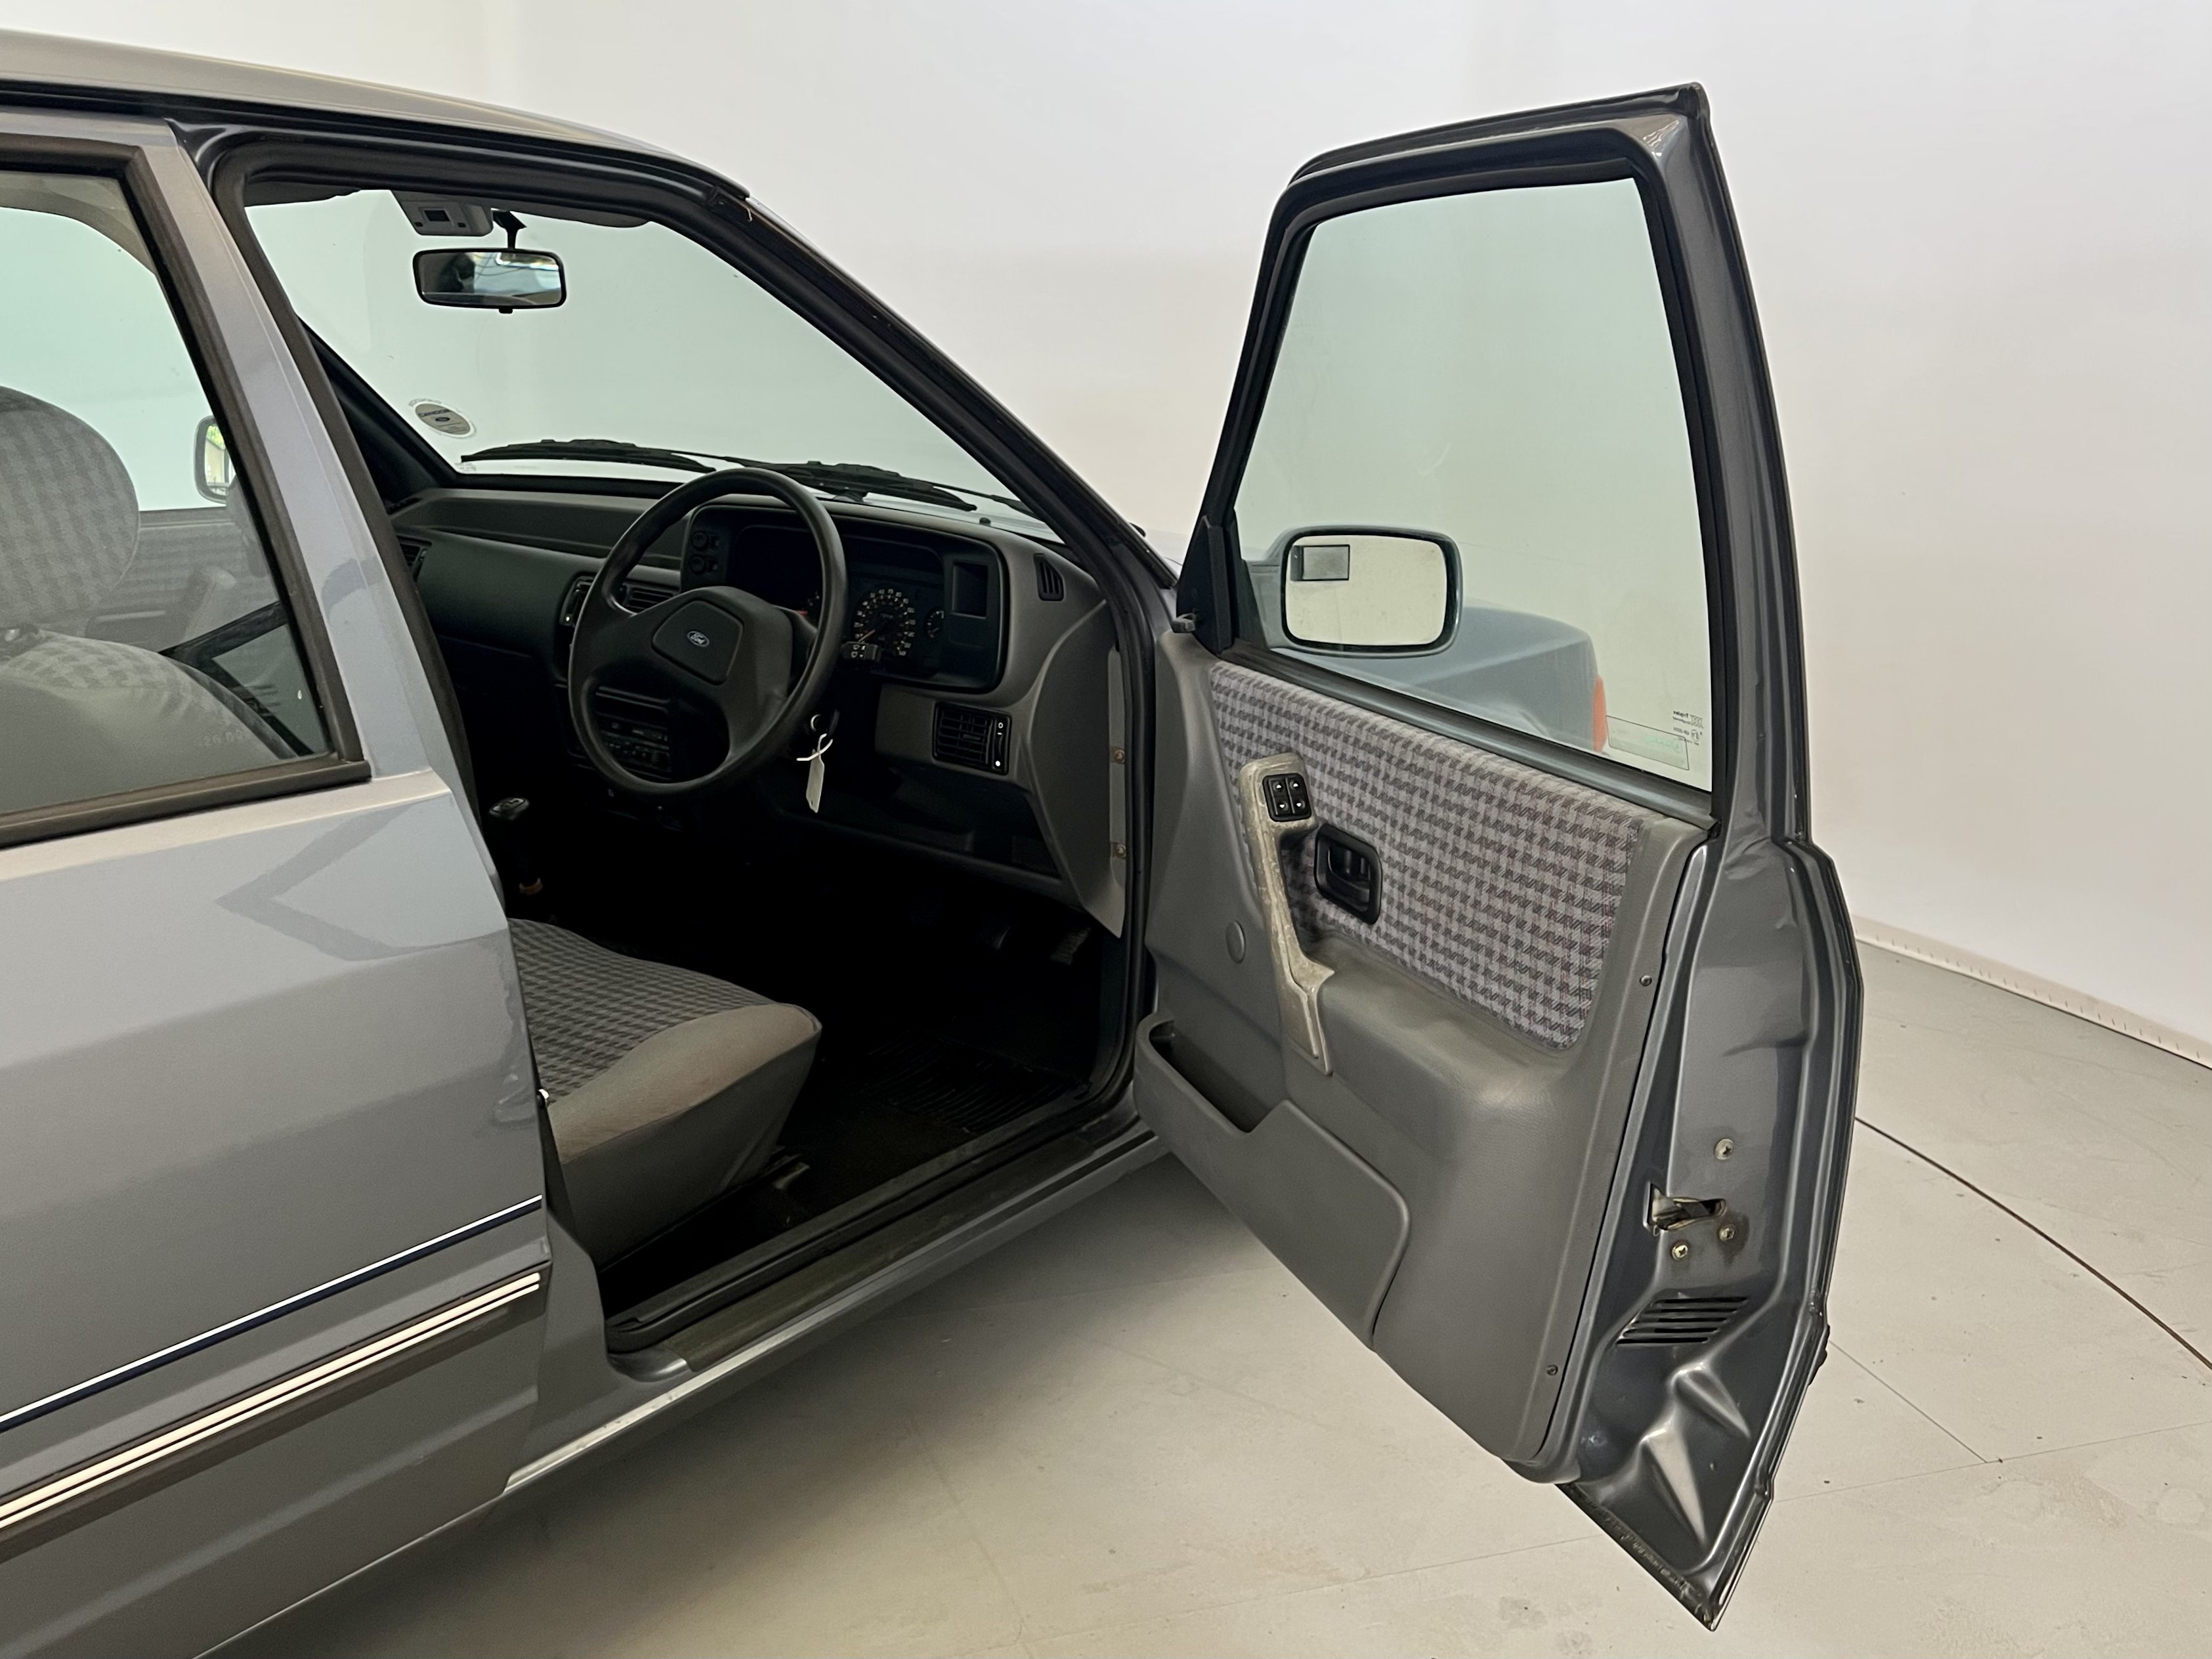 Ford Orion DX - Image 17 of 34